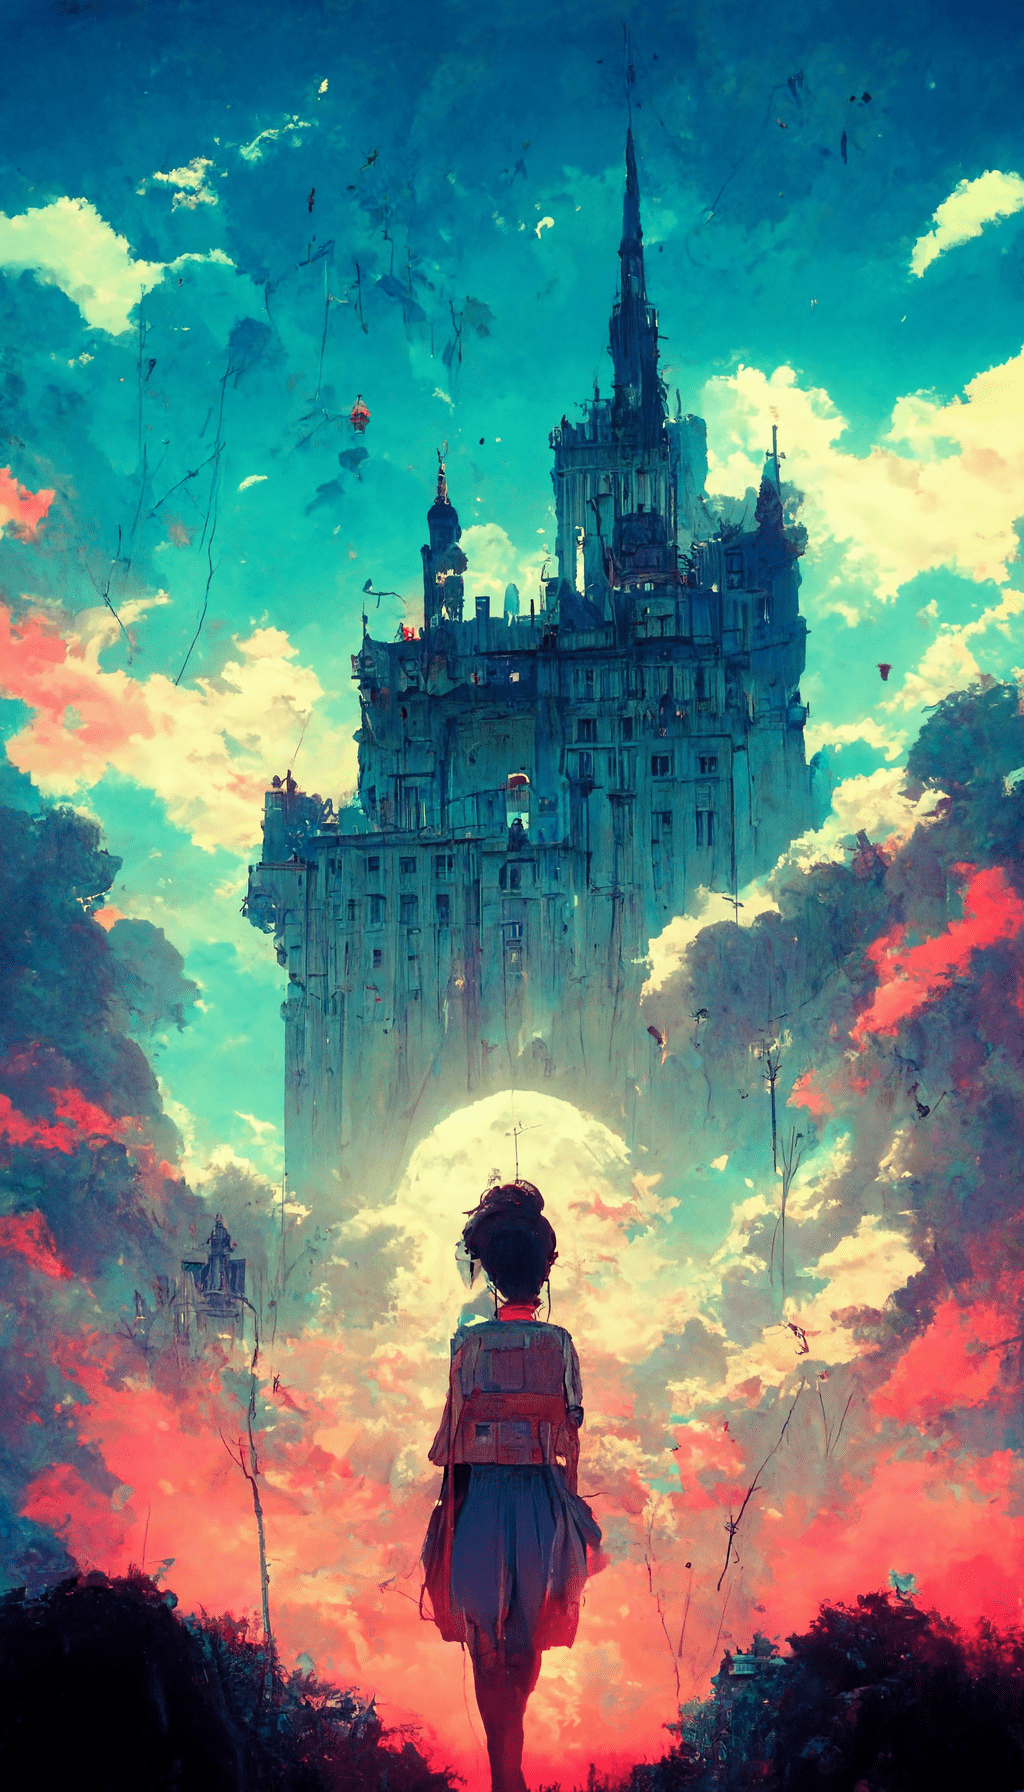 A woman standing in front of a castle in the clouds - Anime, art, cool, beautiful, iPhone, castle, couple, phone, pretty, blue anime, anime city